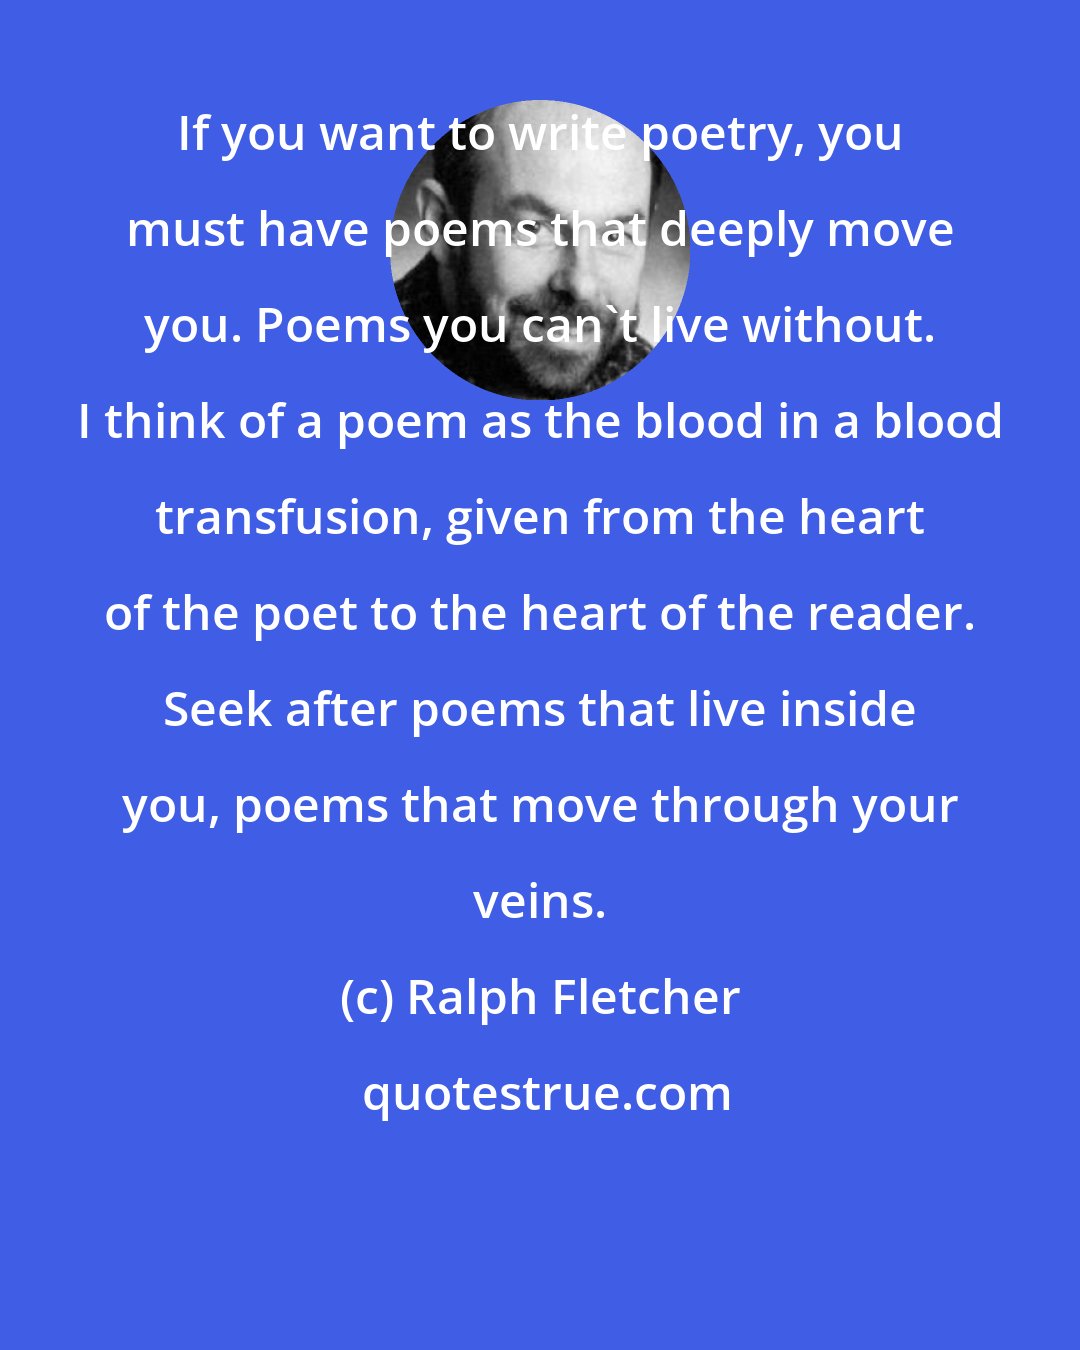 Ralph Fletcher: If you want to write poetry, you must have poems that deeply move you. Poems you can't live without. I think of a poem as the blood in a blood transfusion, given from the heart of the poet to the heart of the reader. Seek after poems that live inside you, poems that move through your veins.